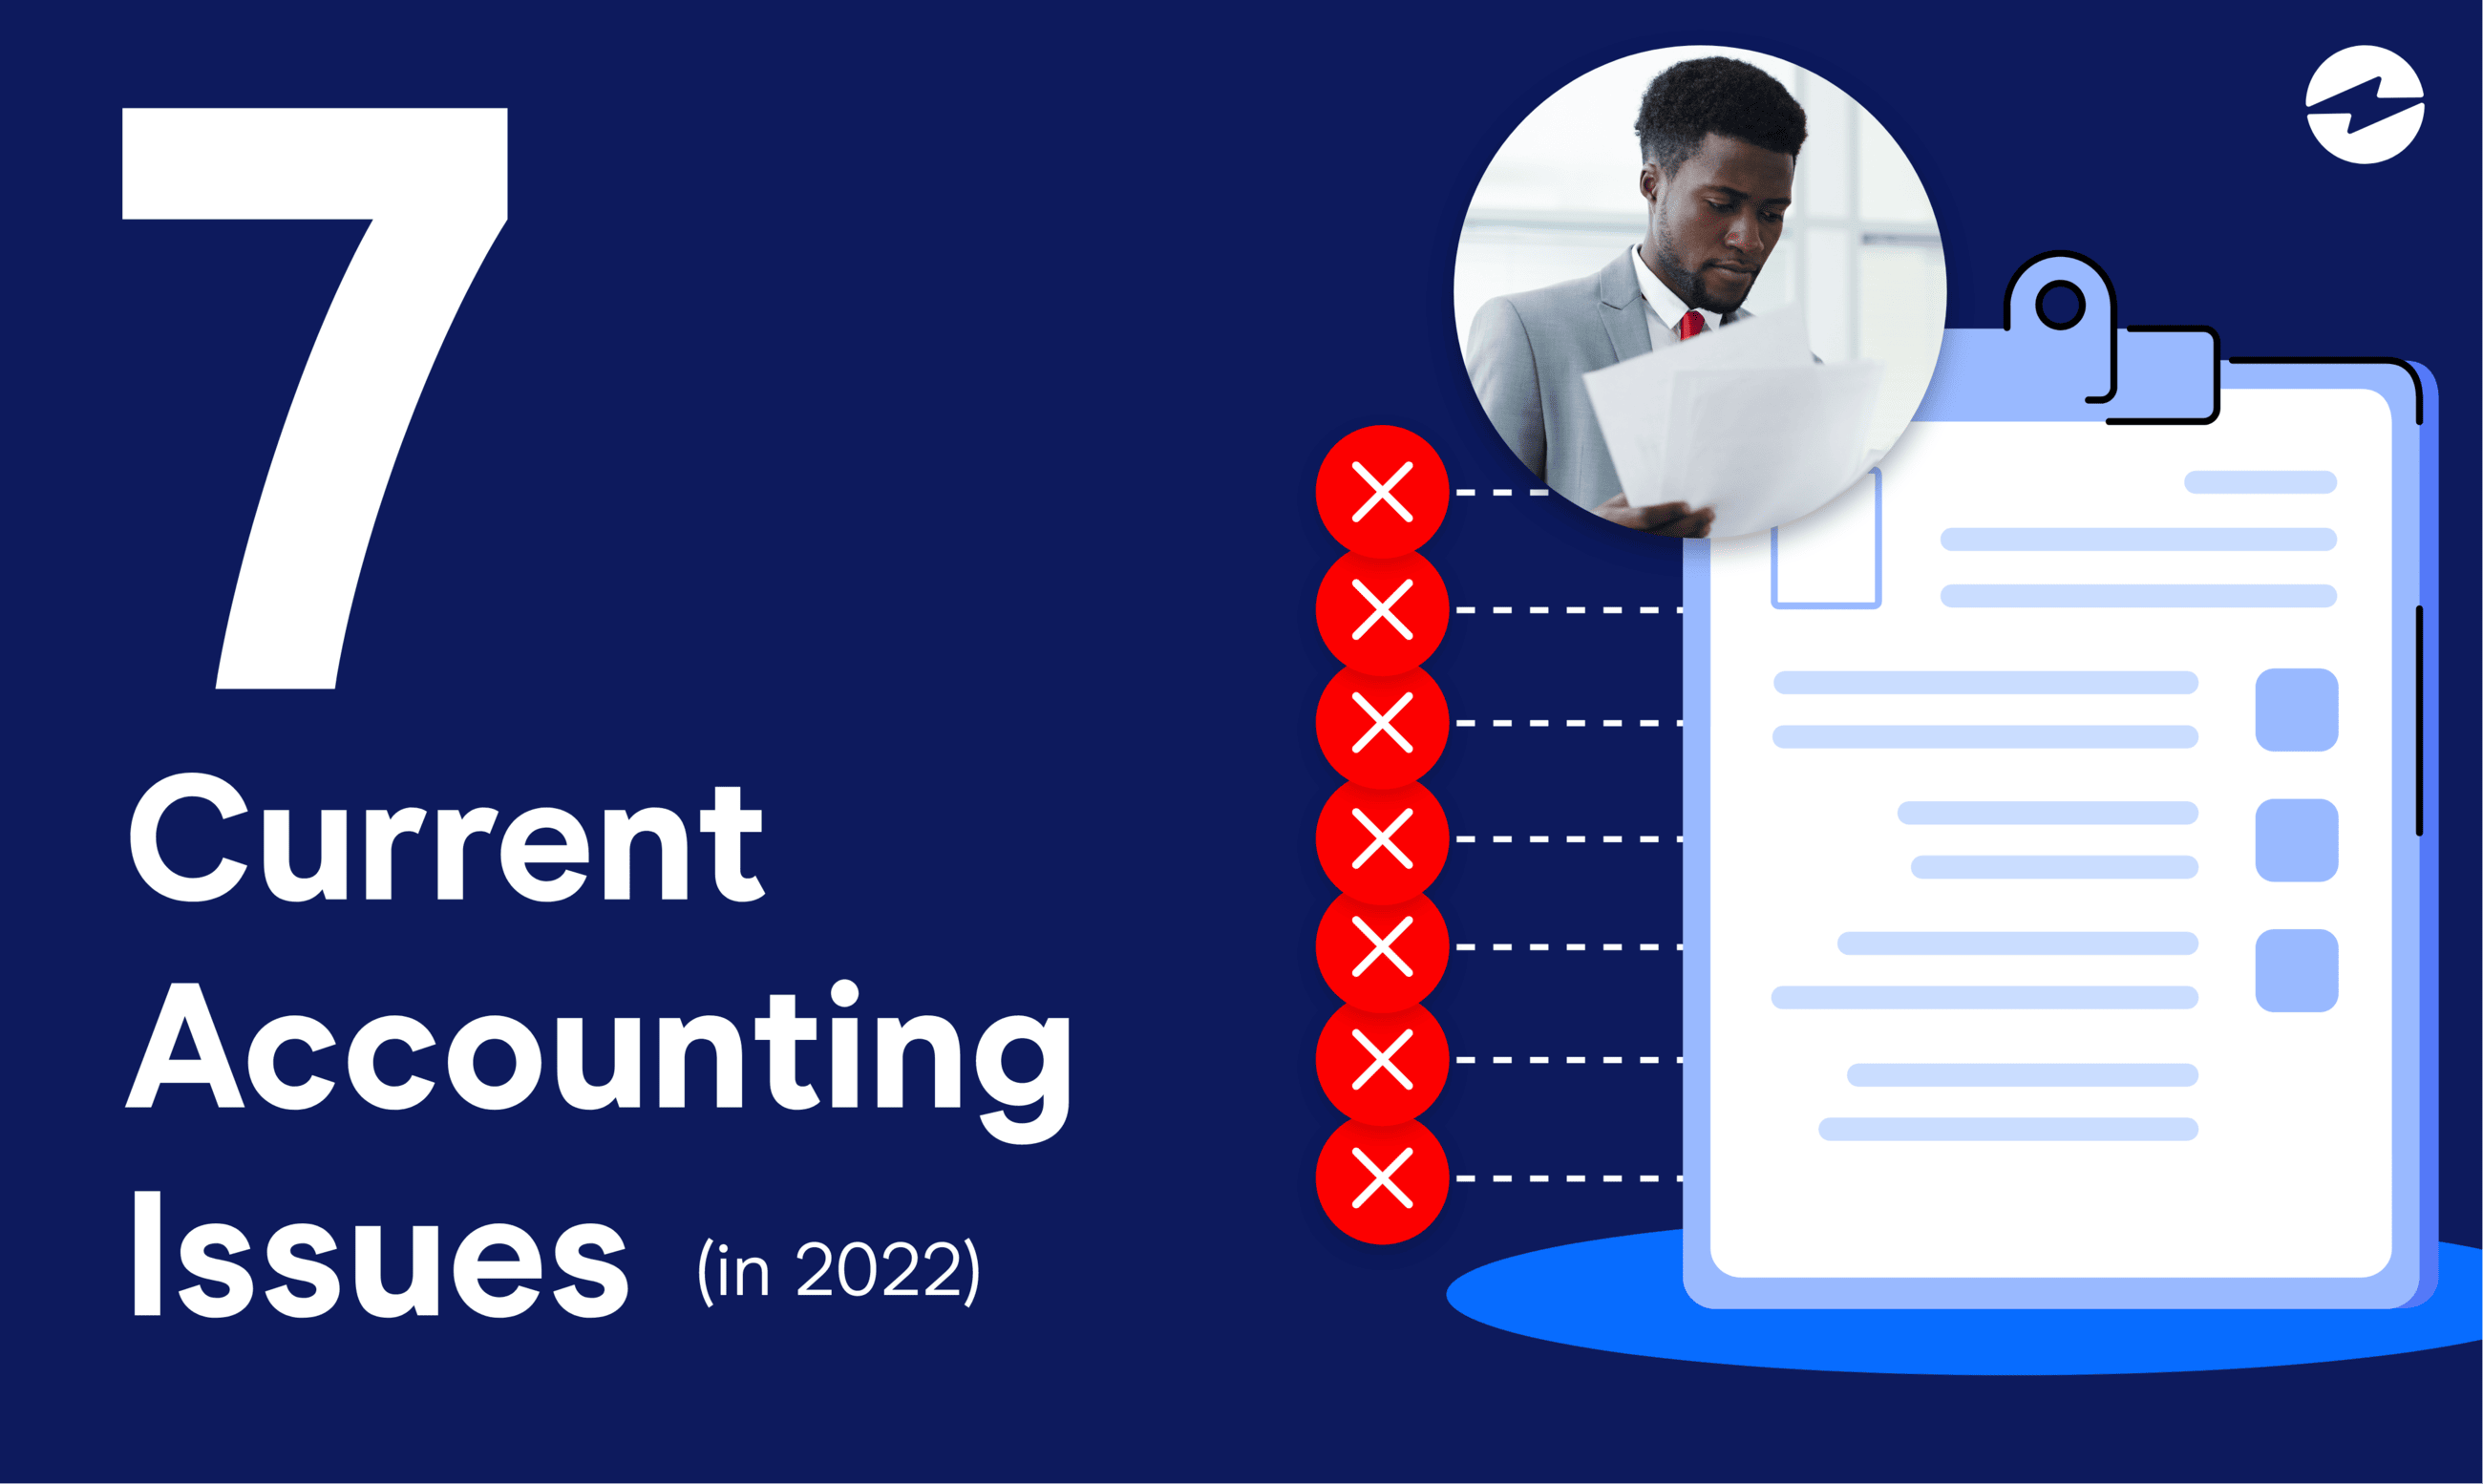 7 Current Accounting Issues in 2022